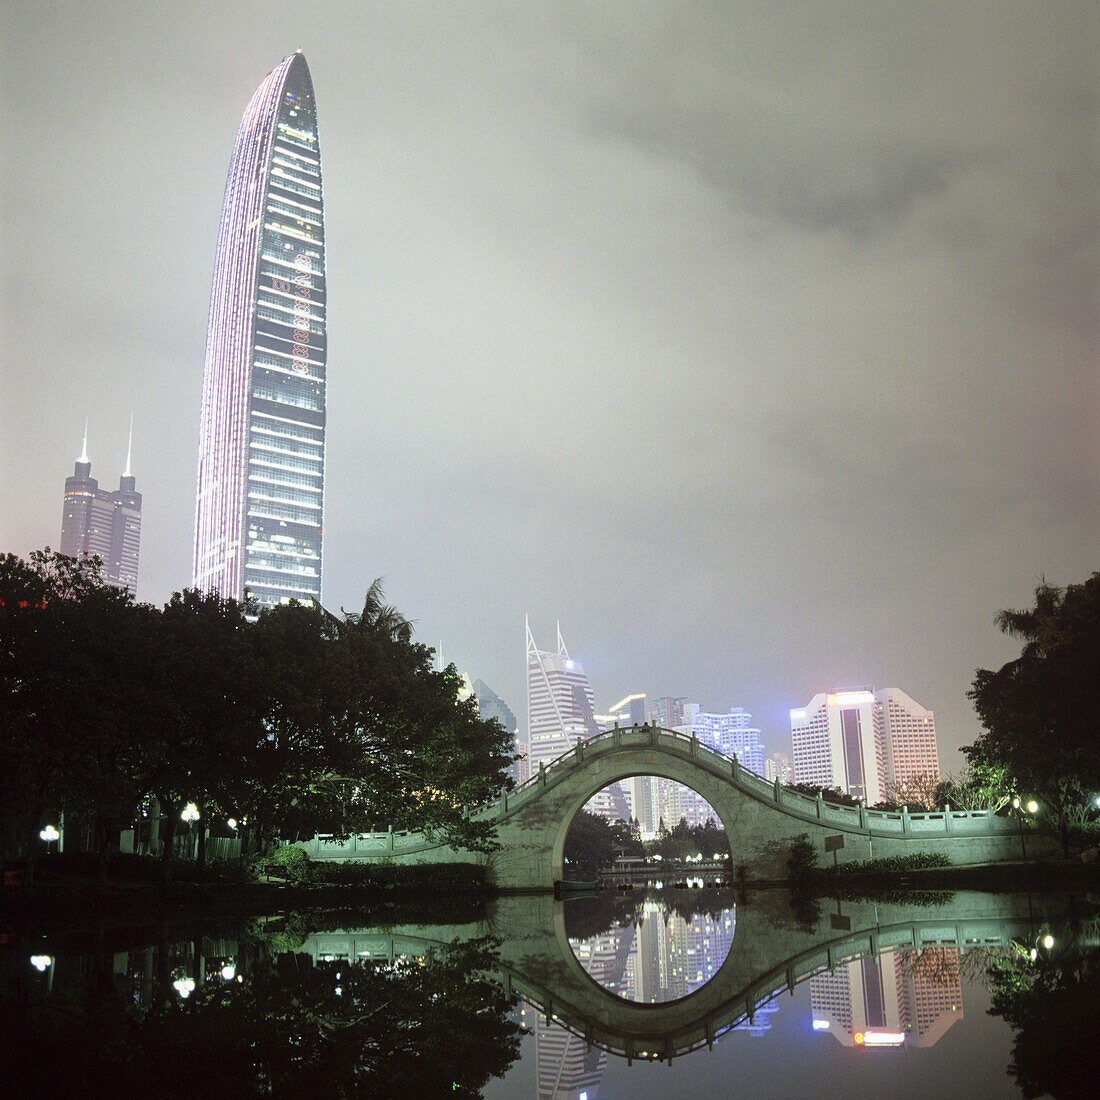 View of illuminated city buildings across water at night, Shenzhen, China